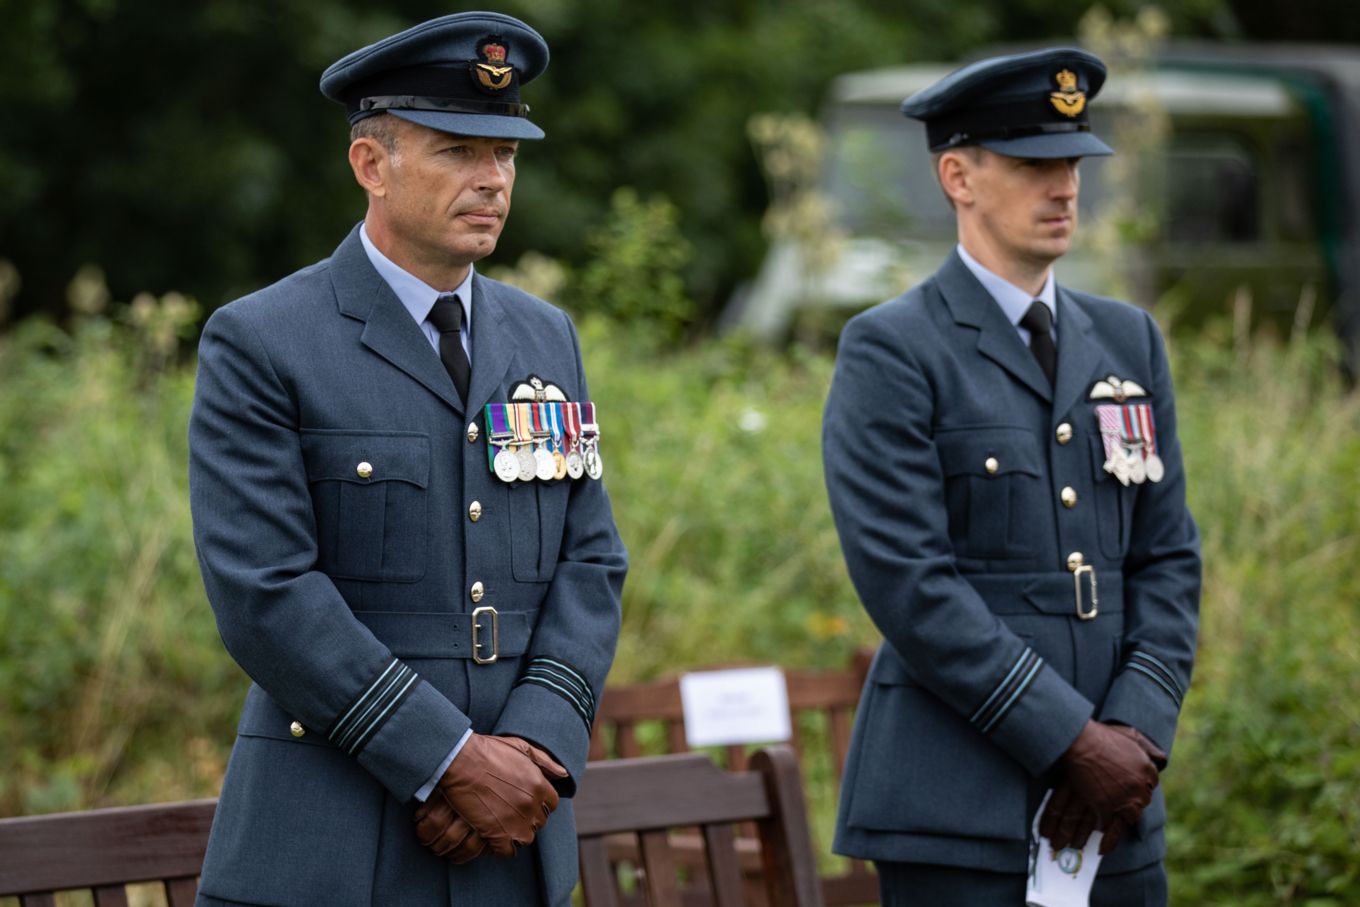 From left to right: Squadron Leader Rich Kellett and Flight Lieutenant Ed Berwick of No 115 Squadron, RAF Wittering